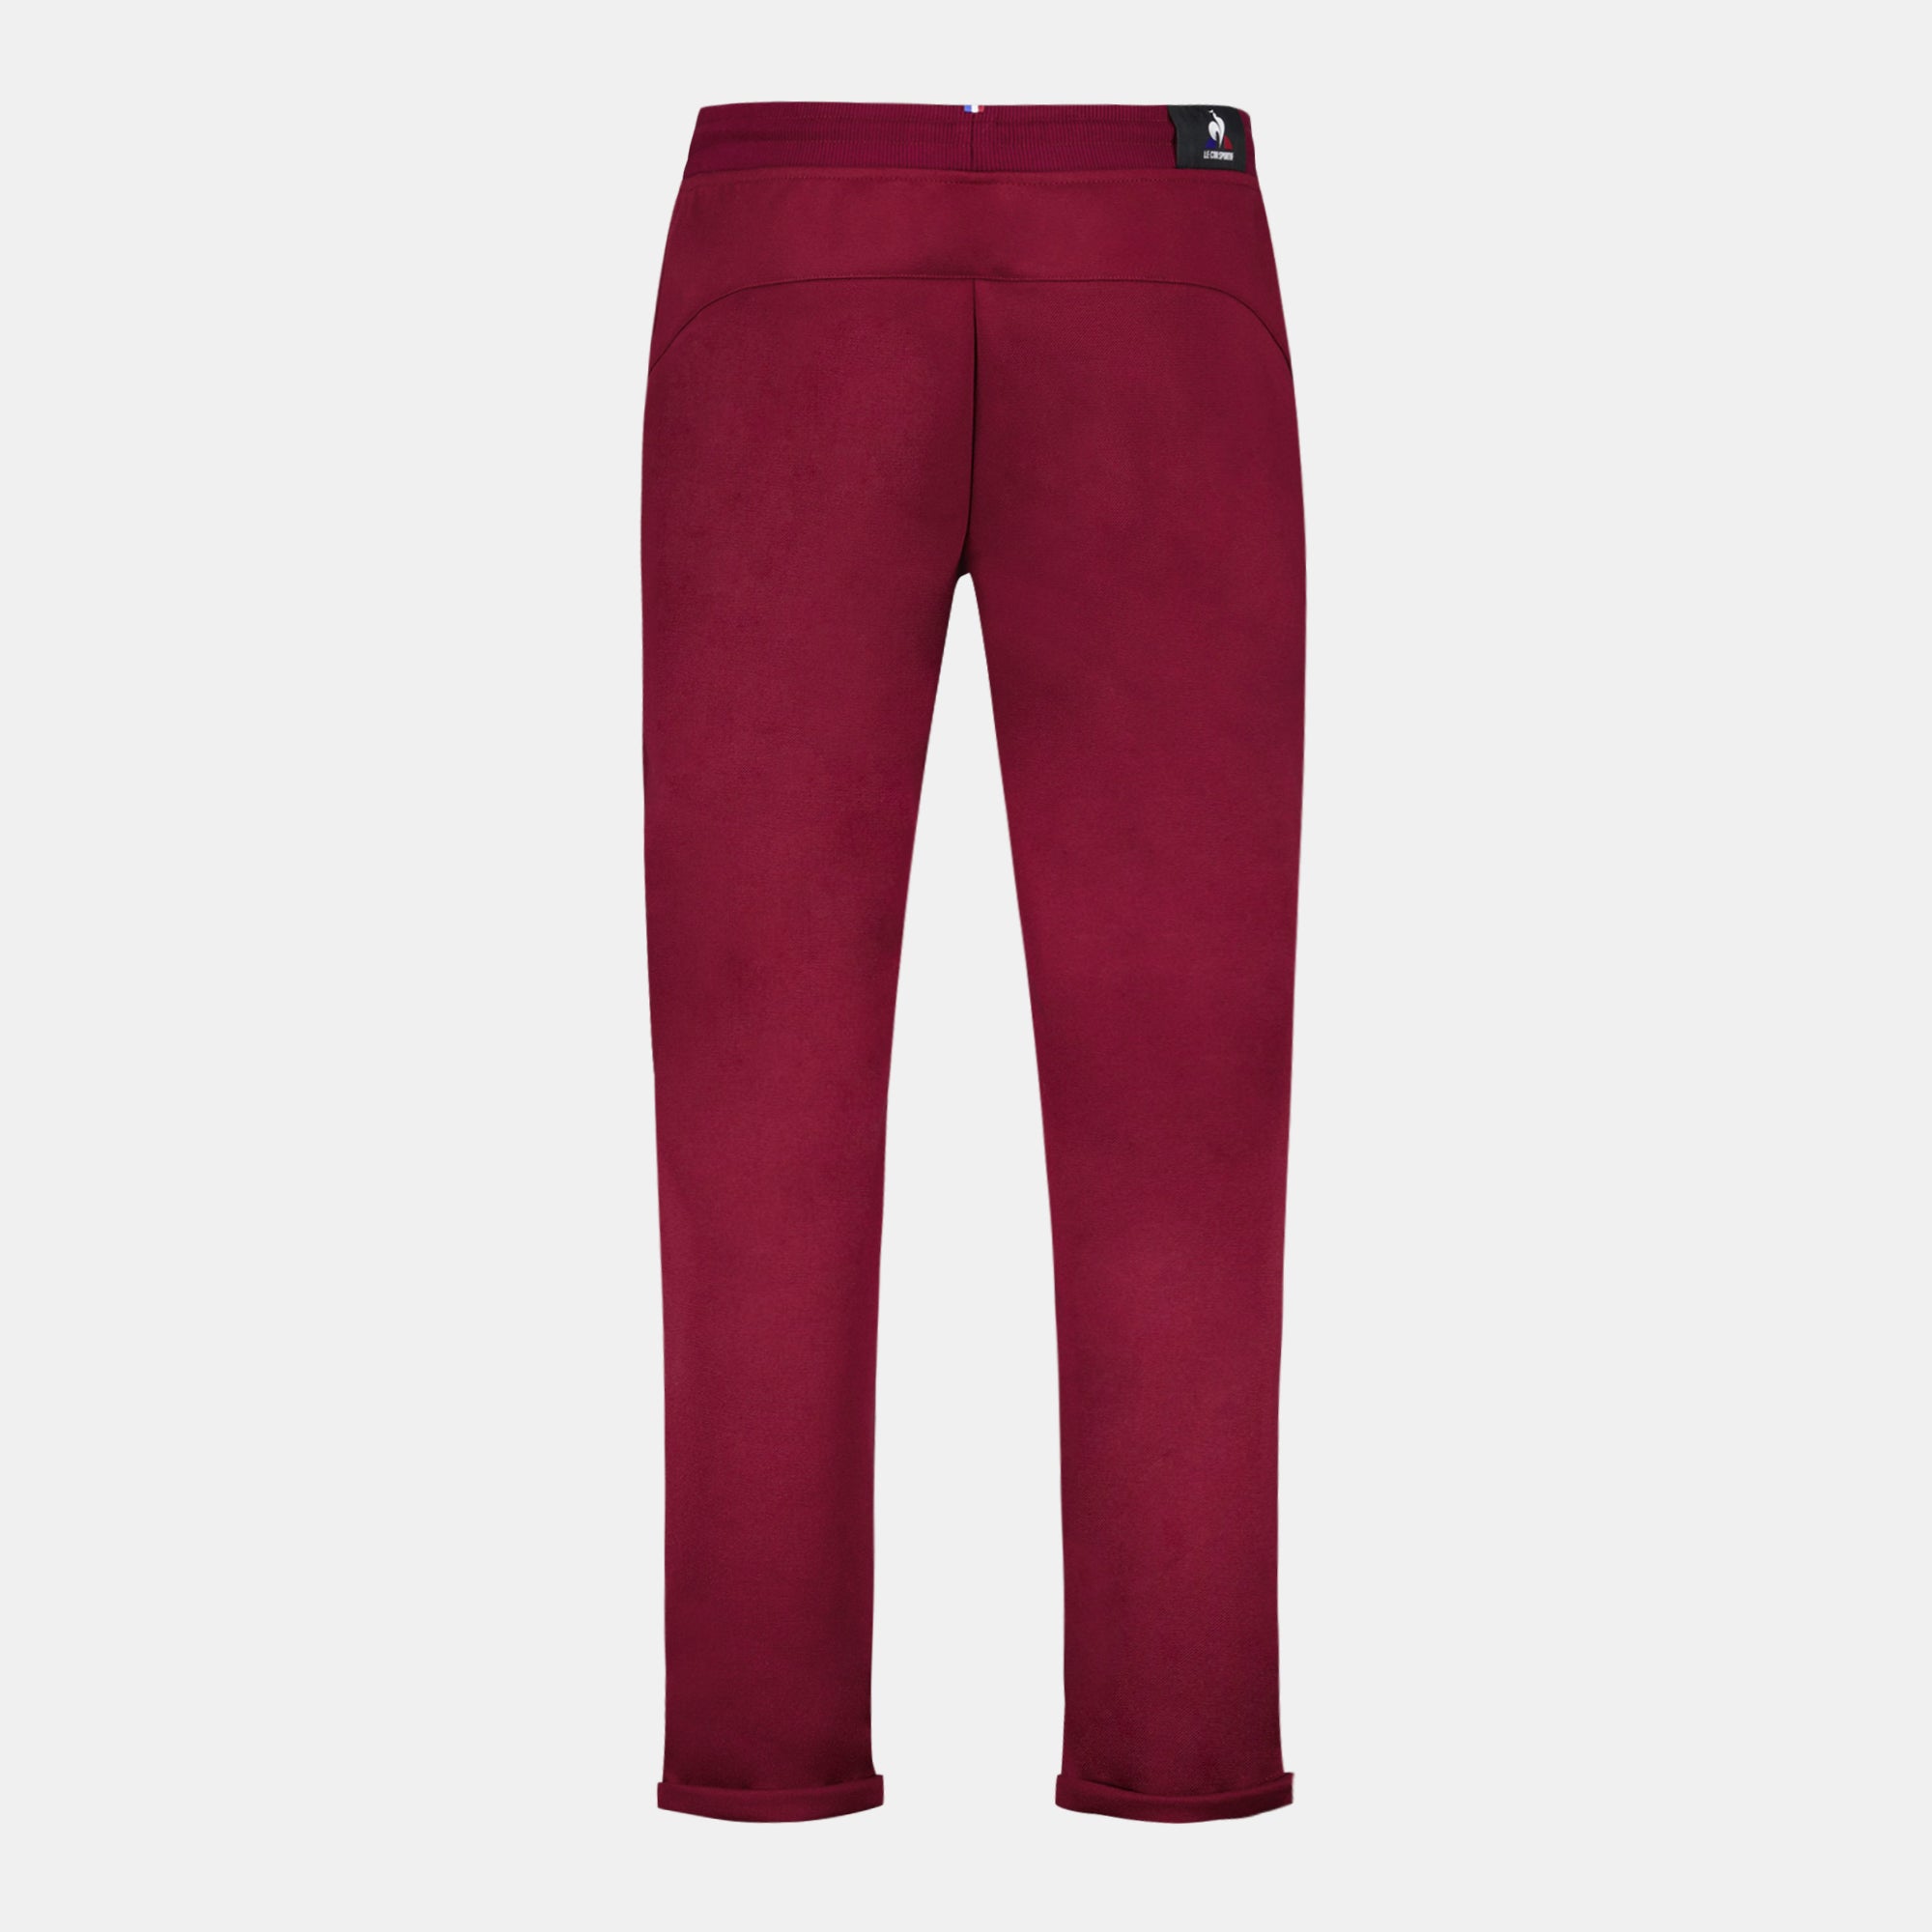 2410766-ESS T/T Pant Carotte N°2 M rambo red  | Hose coupe carotte für Herren